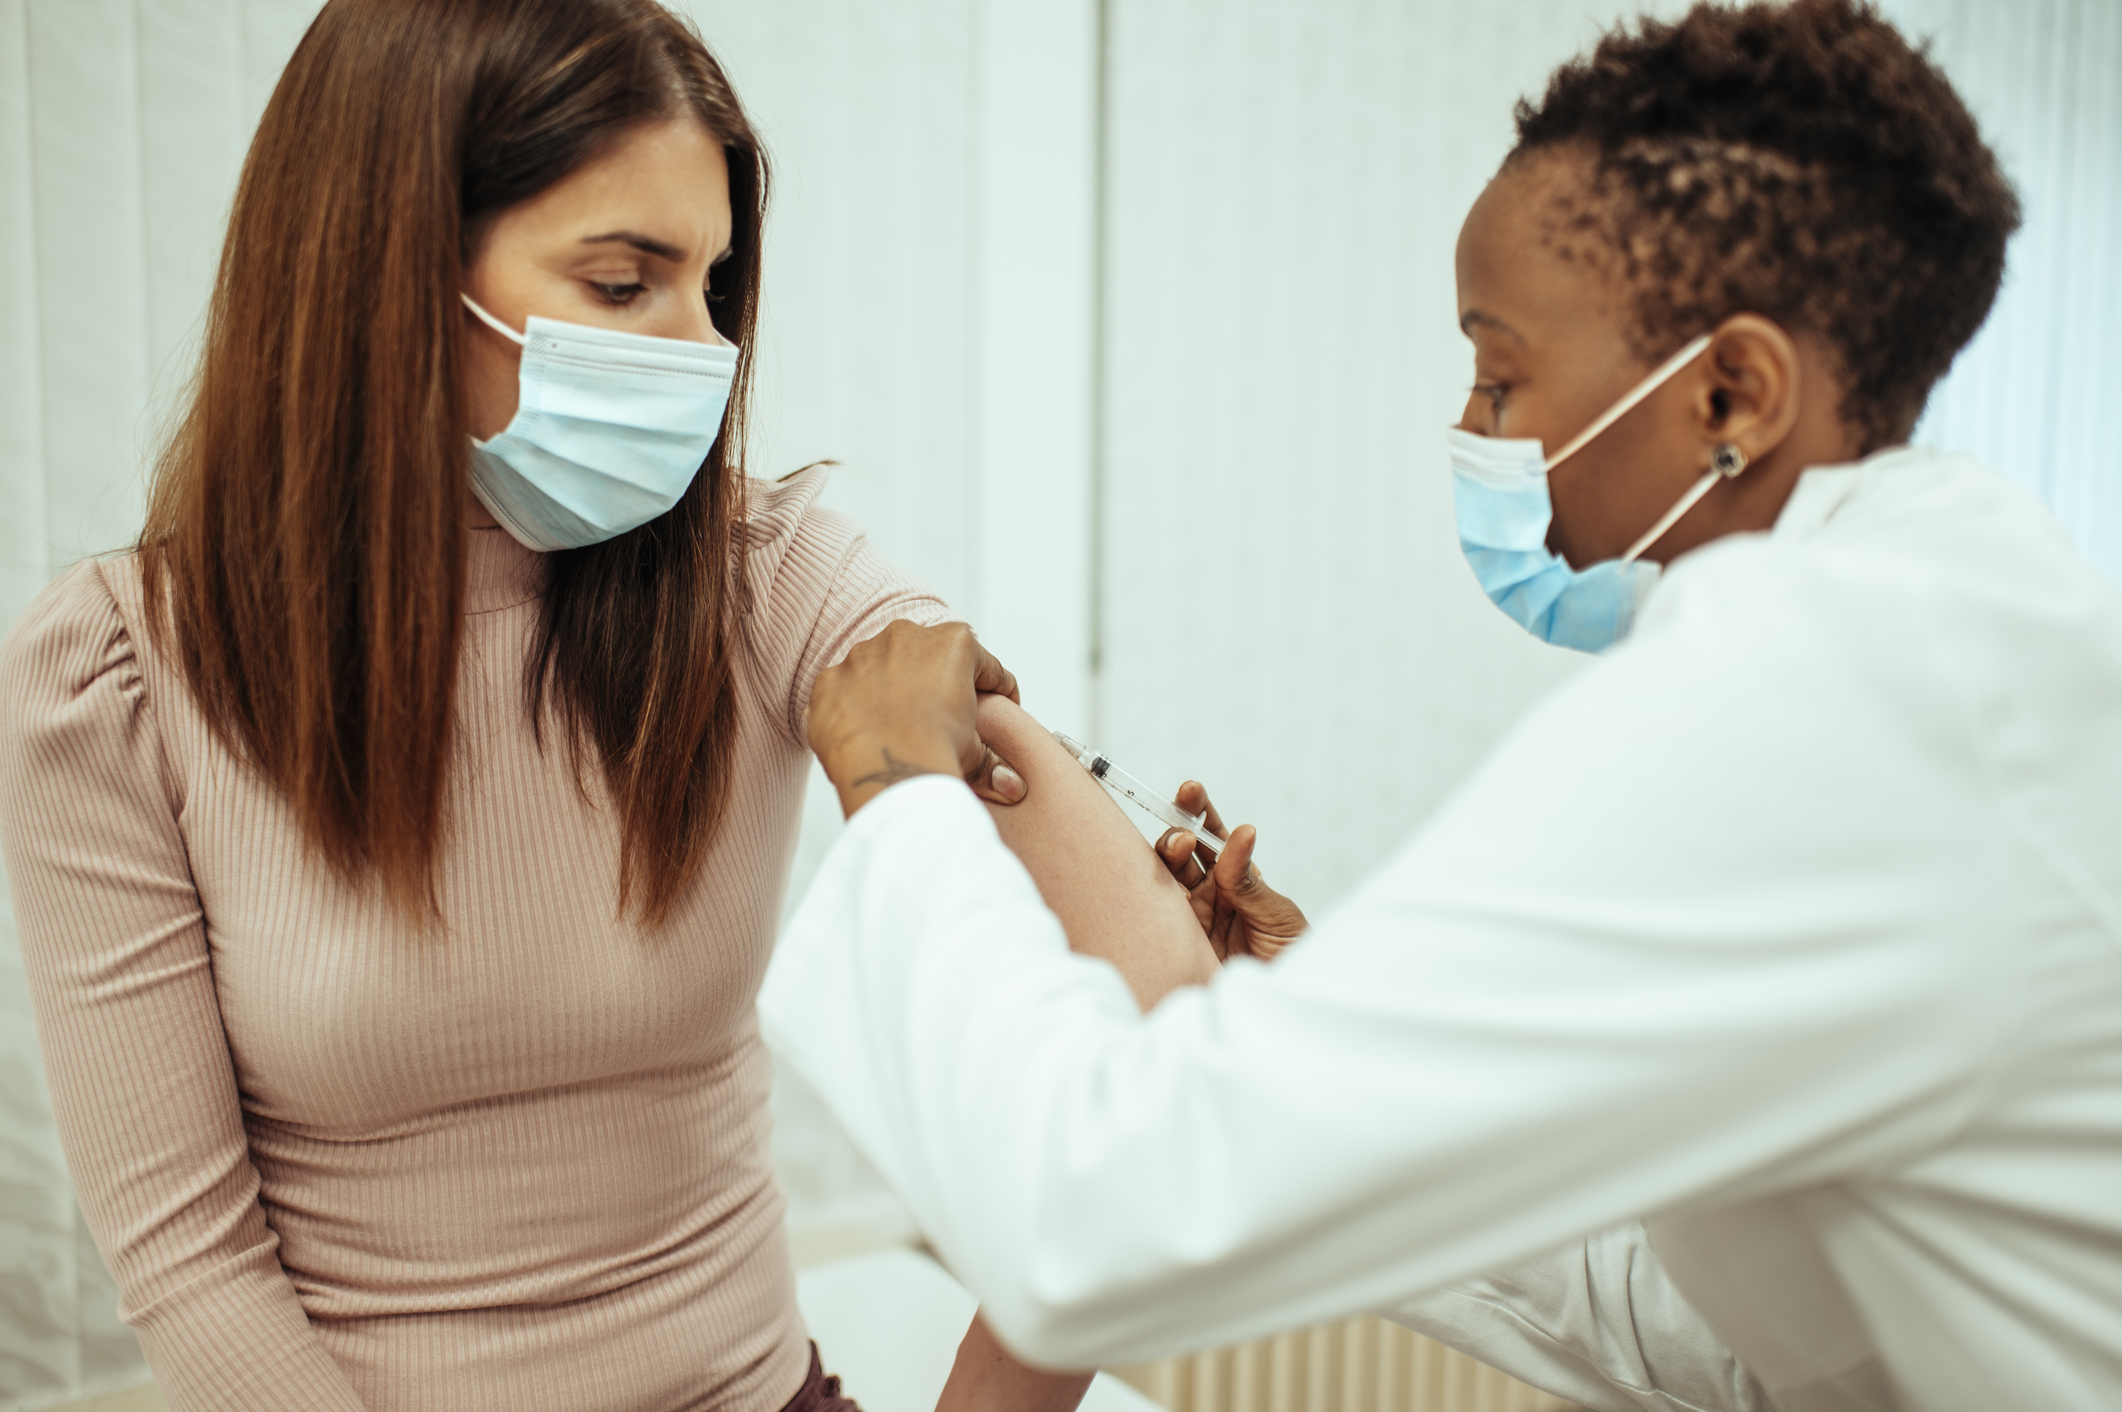 A doctor administers a vaccine to a patient. Both  are wearing blue face masks.